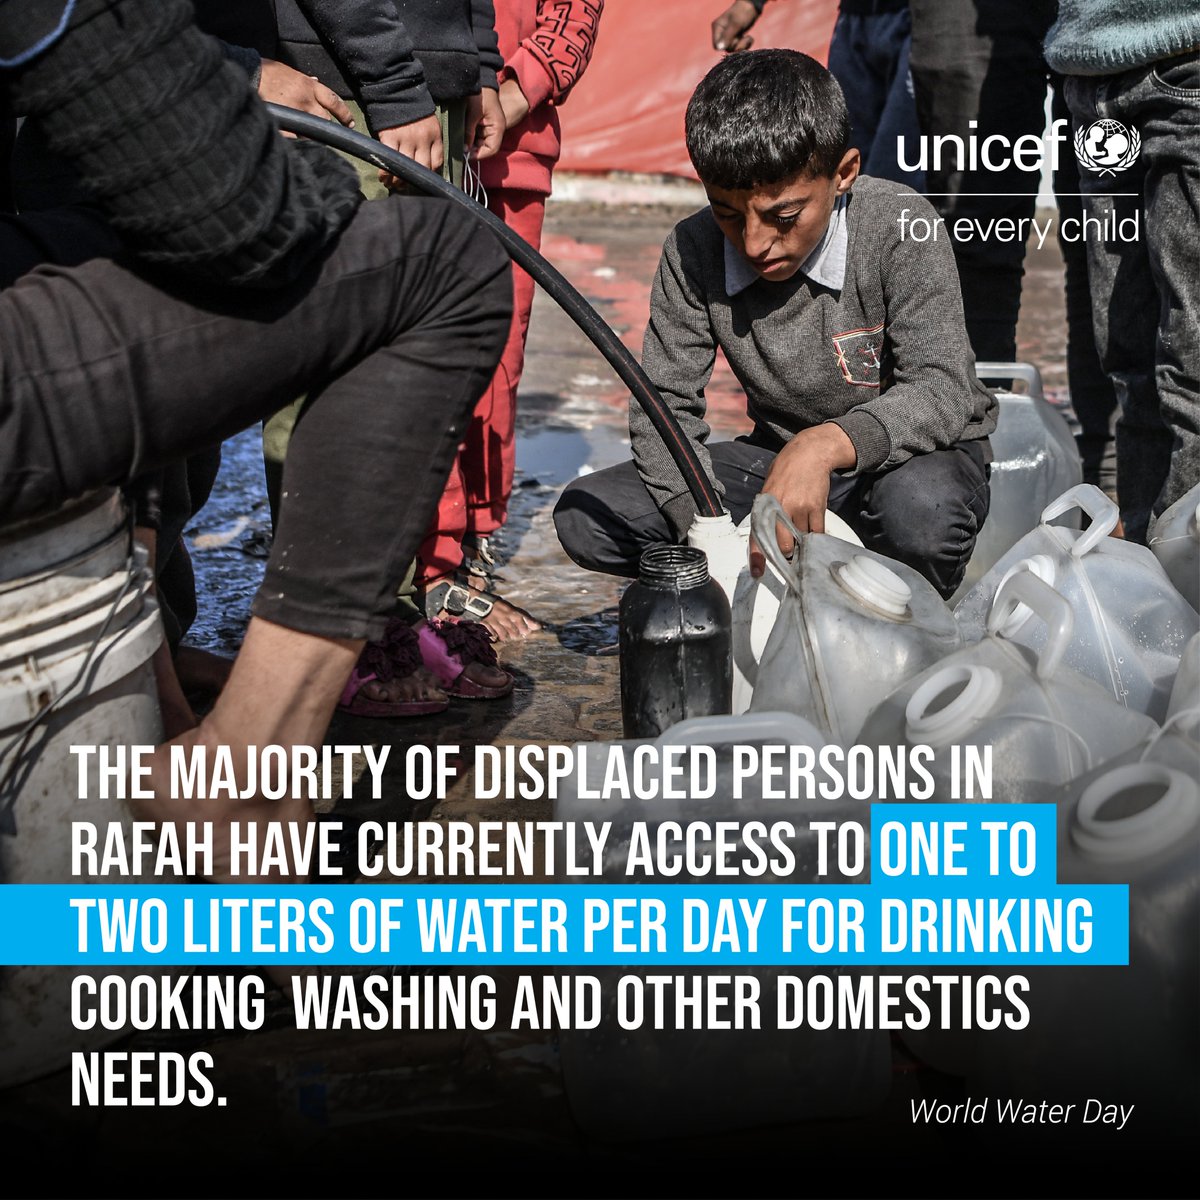 Many children families displaced by the war in the #Gaza_Strip have access to only 1L of #water per person per day, far below the minimum needed. When water is scarce or polluted, or when people struggle for access, tensions rise. #Children need #water. #WorldWaterDay